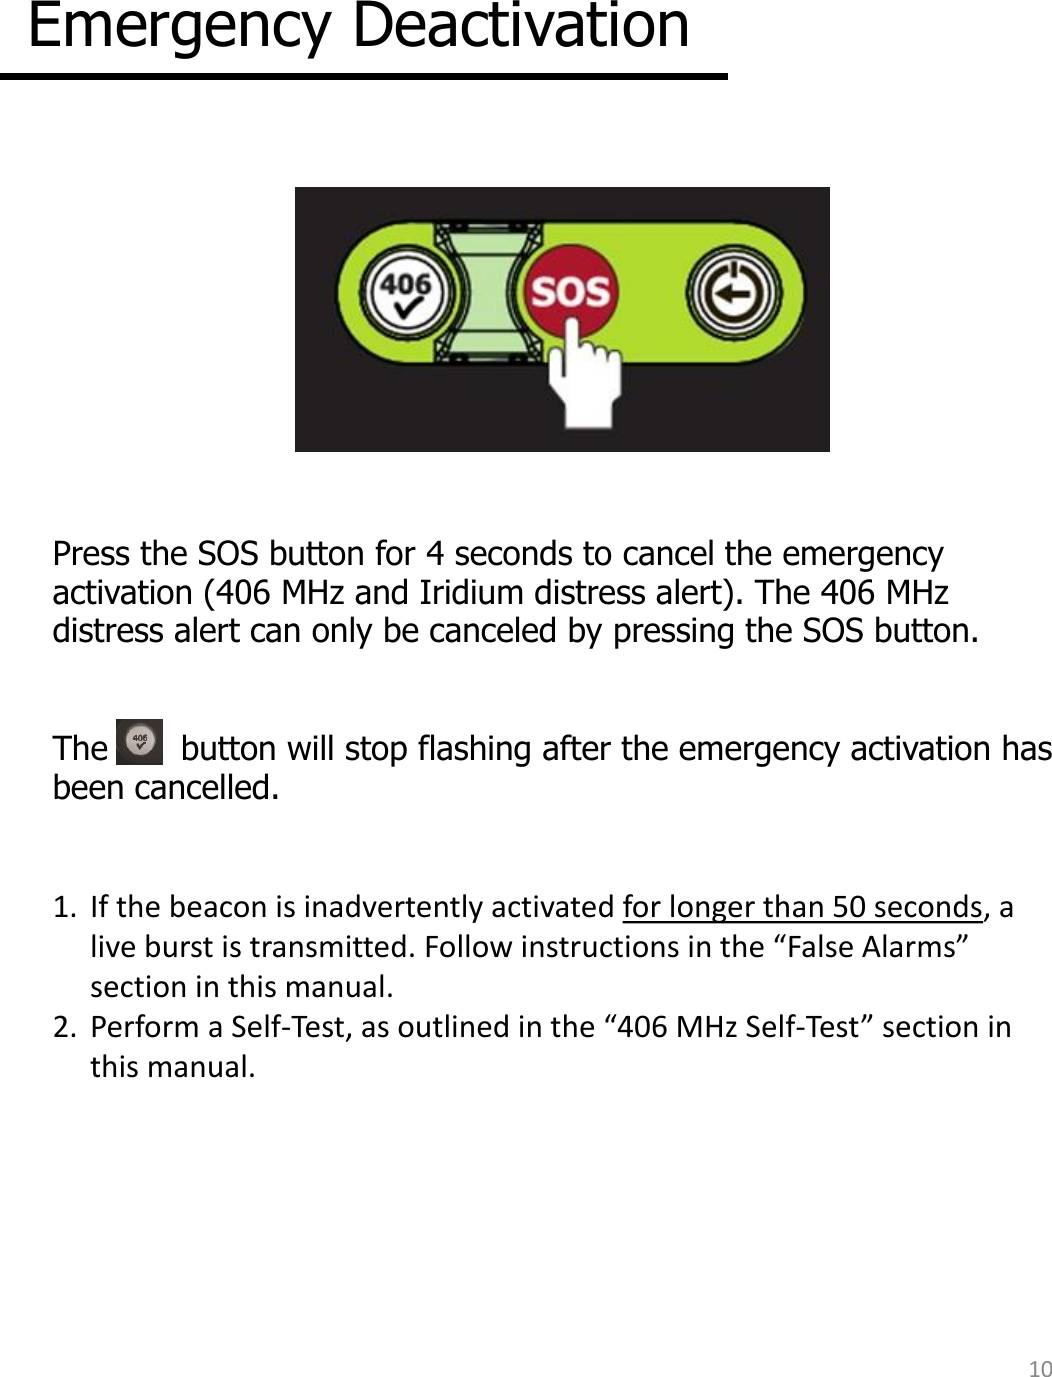 Emergency Deactivation  Press the SOS button for 4 seconds to cancel the emergency activation (406 MHz and Iridium distress alert). The 406 MHz distress alert can only be canceled by pressing the SOS button.  The       button will stop flashing after the emergency activation has been cancelled.  1.  If the beacon is inadvertently activated for longer than 50 seconds, a live burst is transmitted. Follow instructions in the “False Alarms” section in this manual. 2.  Perform a Self-Test, as outlined in the “406 MHz Self-Test” section in this manual. 10 